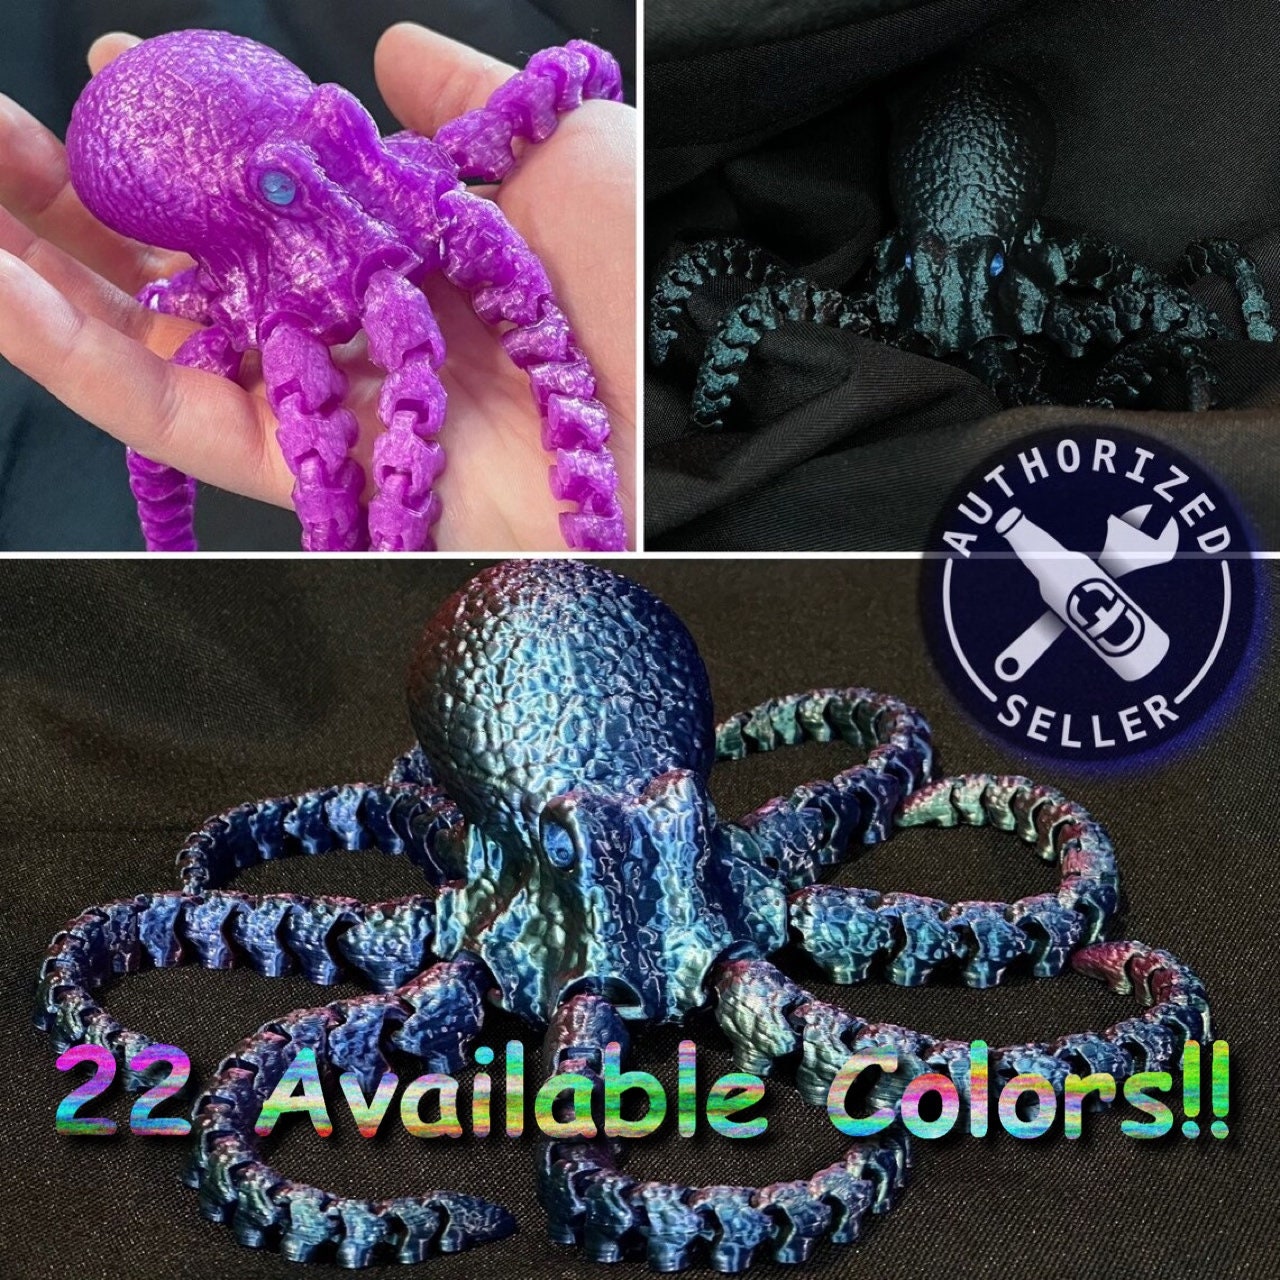 Free Octopus Squeeze-Ball Toys? 'Puck,' Yeah!